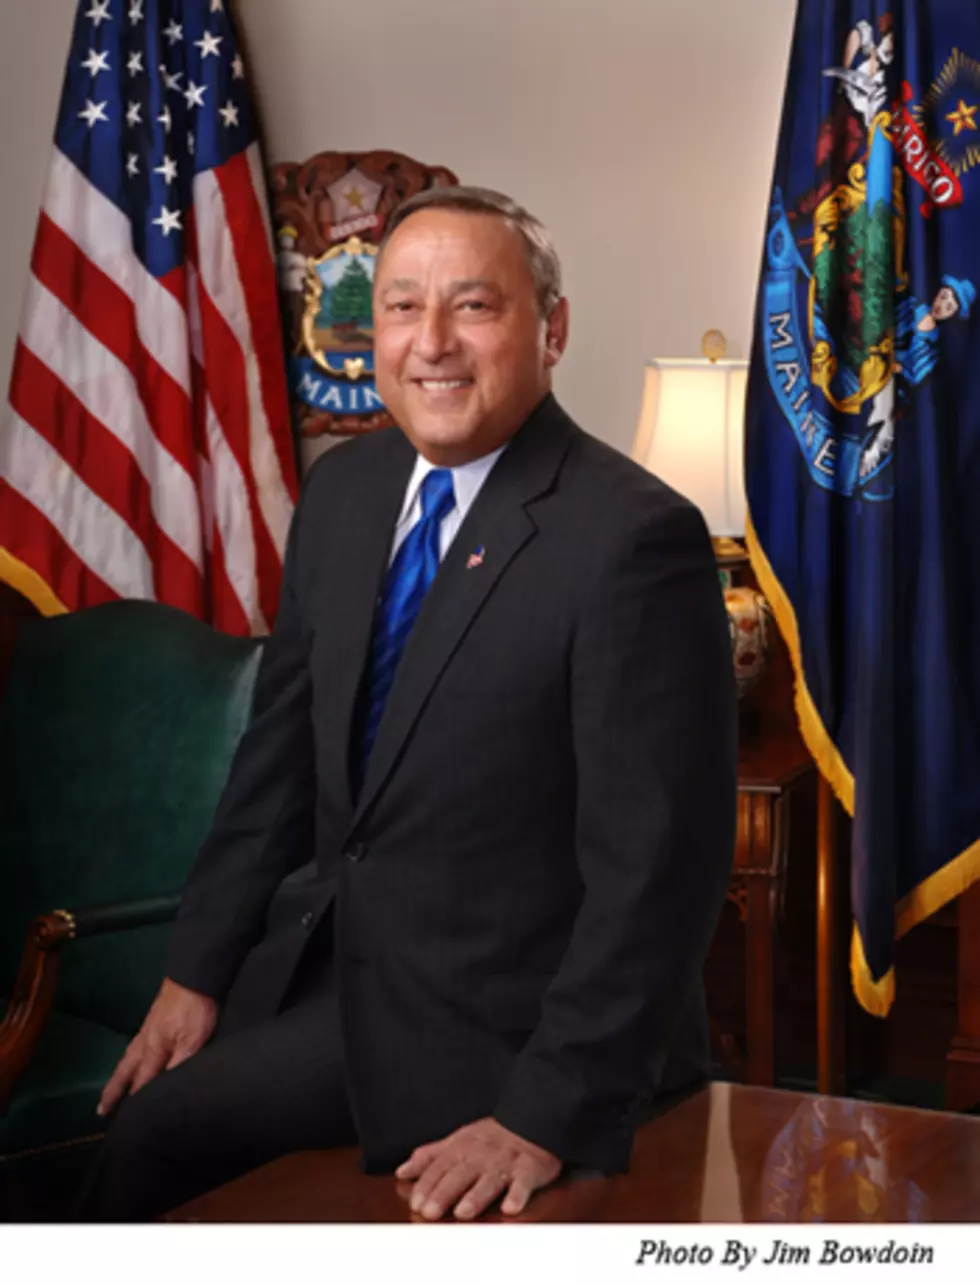 Governor LePage: The Latest Controversial Comments